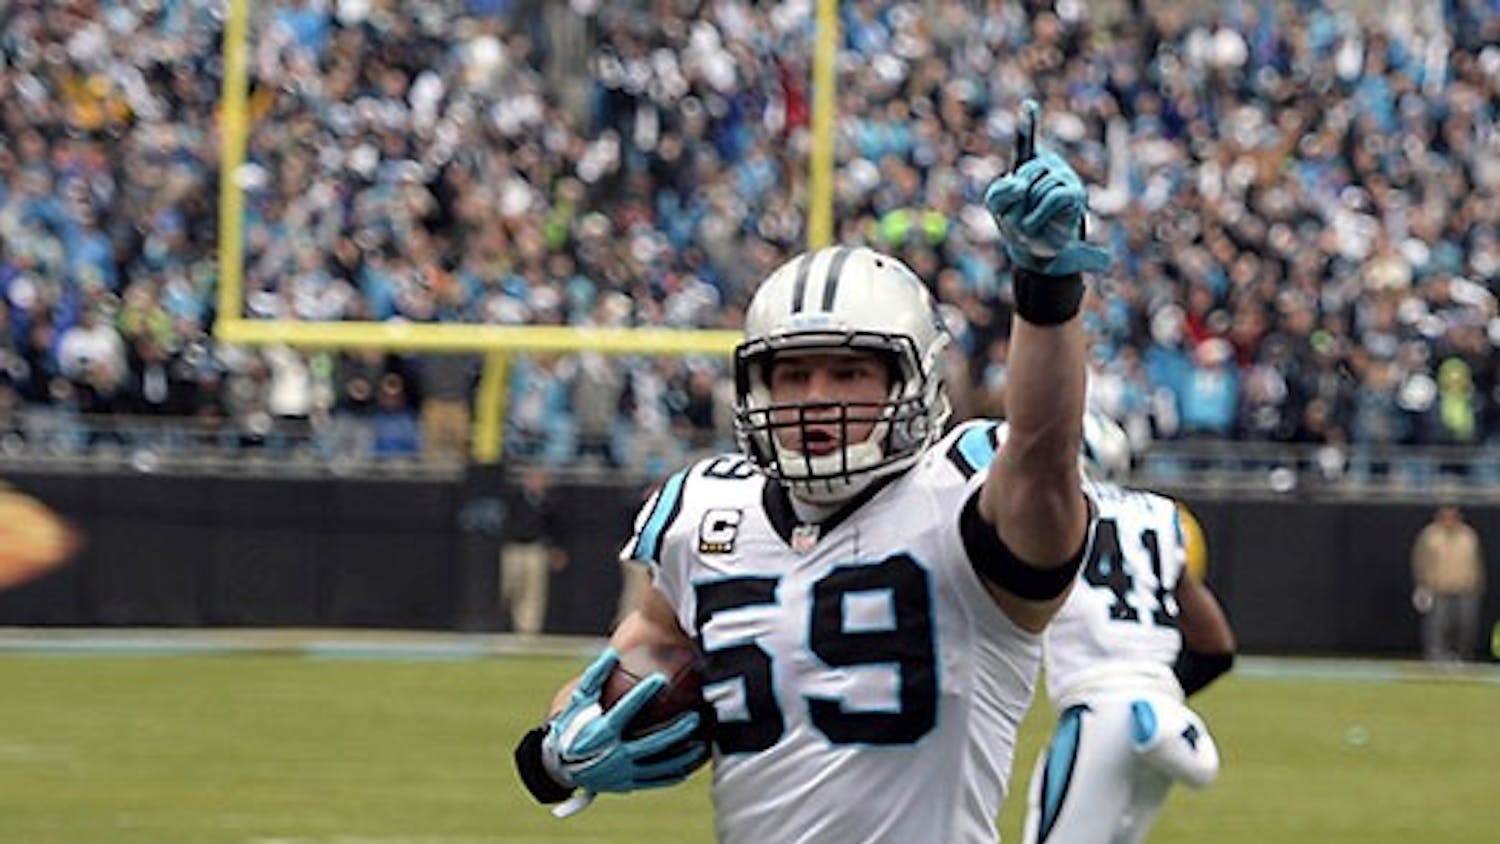 Carolina Panthers&apos; Luke Kuechly (59) celebrates as he returns an interception for a touchdown during the first quarter on Sunday, Jan. 17, 2016, at Bank of America Stadium in Charlotte, N.C. (David T. Foster III/Charlotte Observer/TNS)